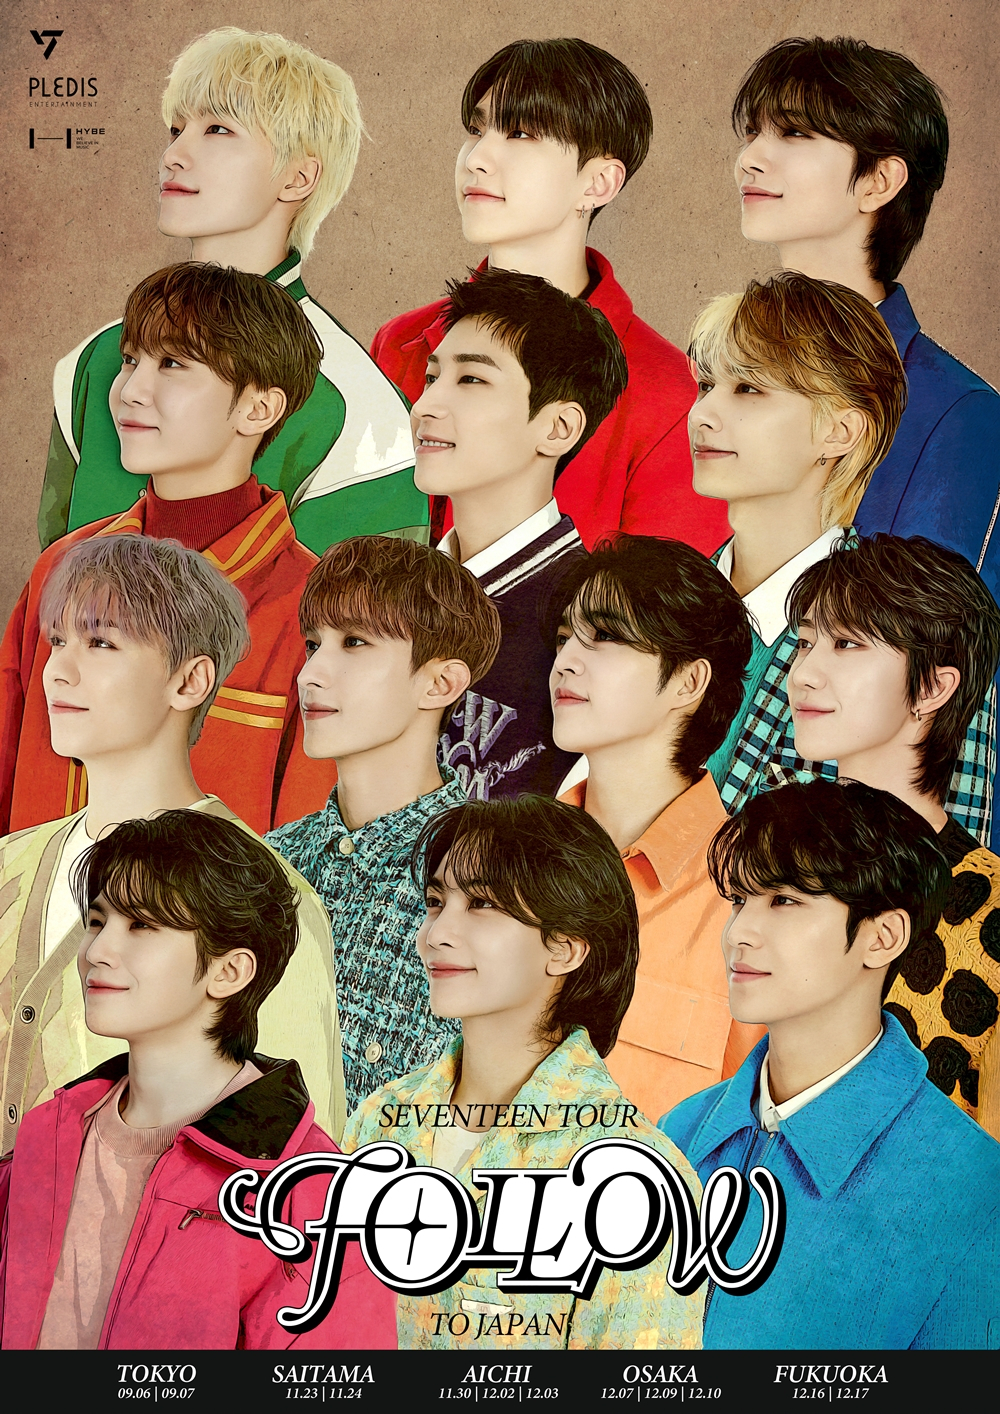 A poster image for Seventeen's concert series, 